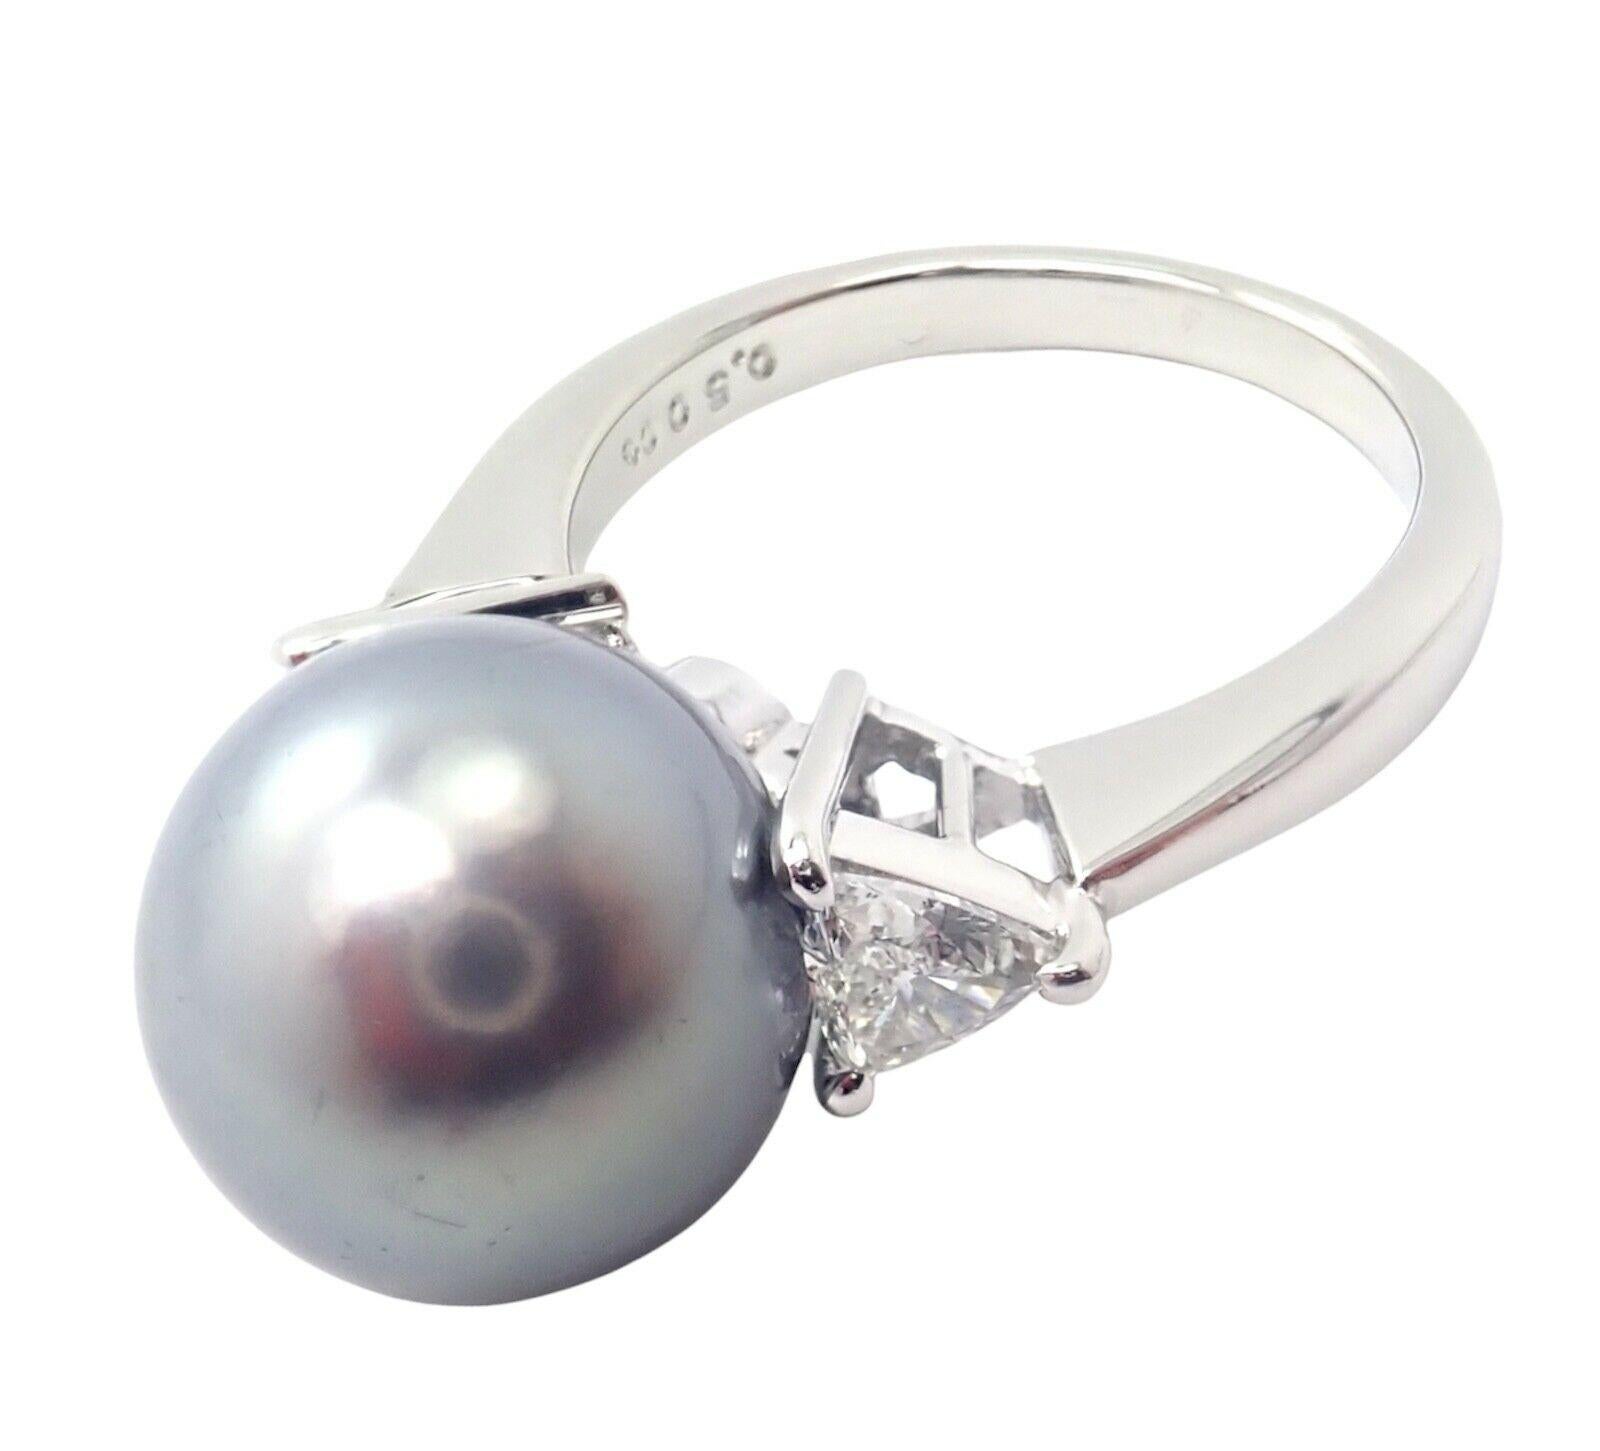 Platinum Diamond Large 12mm Tahitian Pearl Ring by Mikimoto. 
With 2x Trillion cut VS1 clarity, E color diamonds total weight approx. .50ct
1 x 12mm Tahitian South Sea Pearl 
Color Gray
Quality Grade A+
Details: 
Ring Size: 5.5
Weight: 7.9